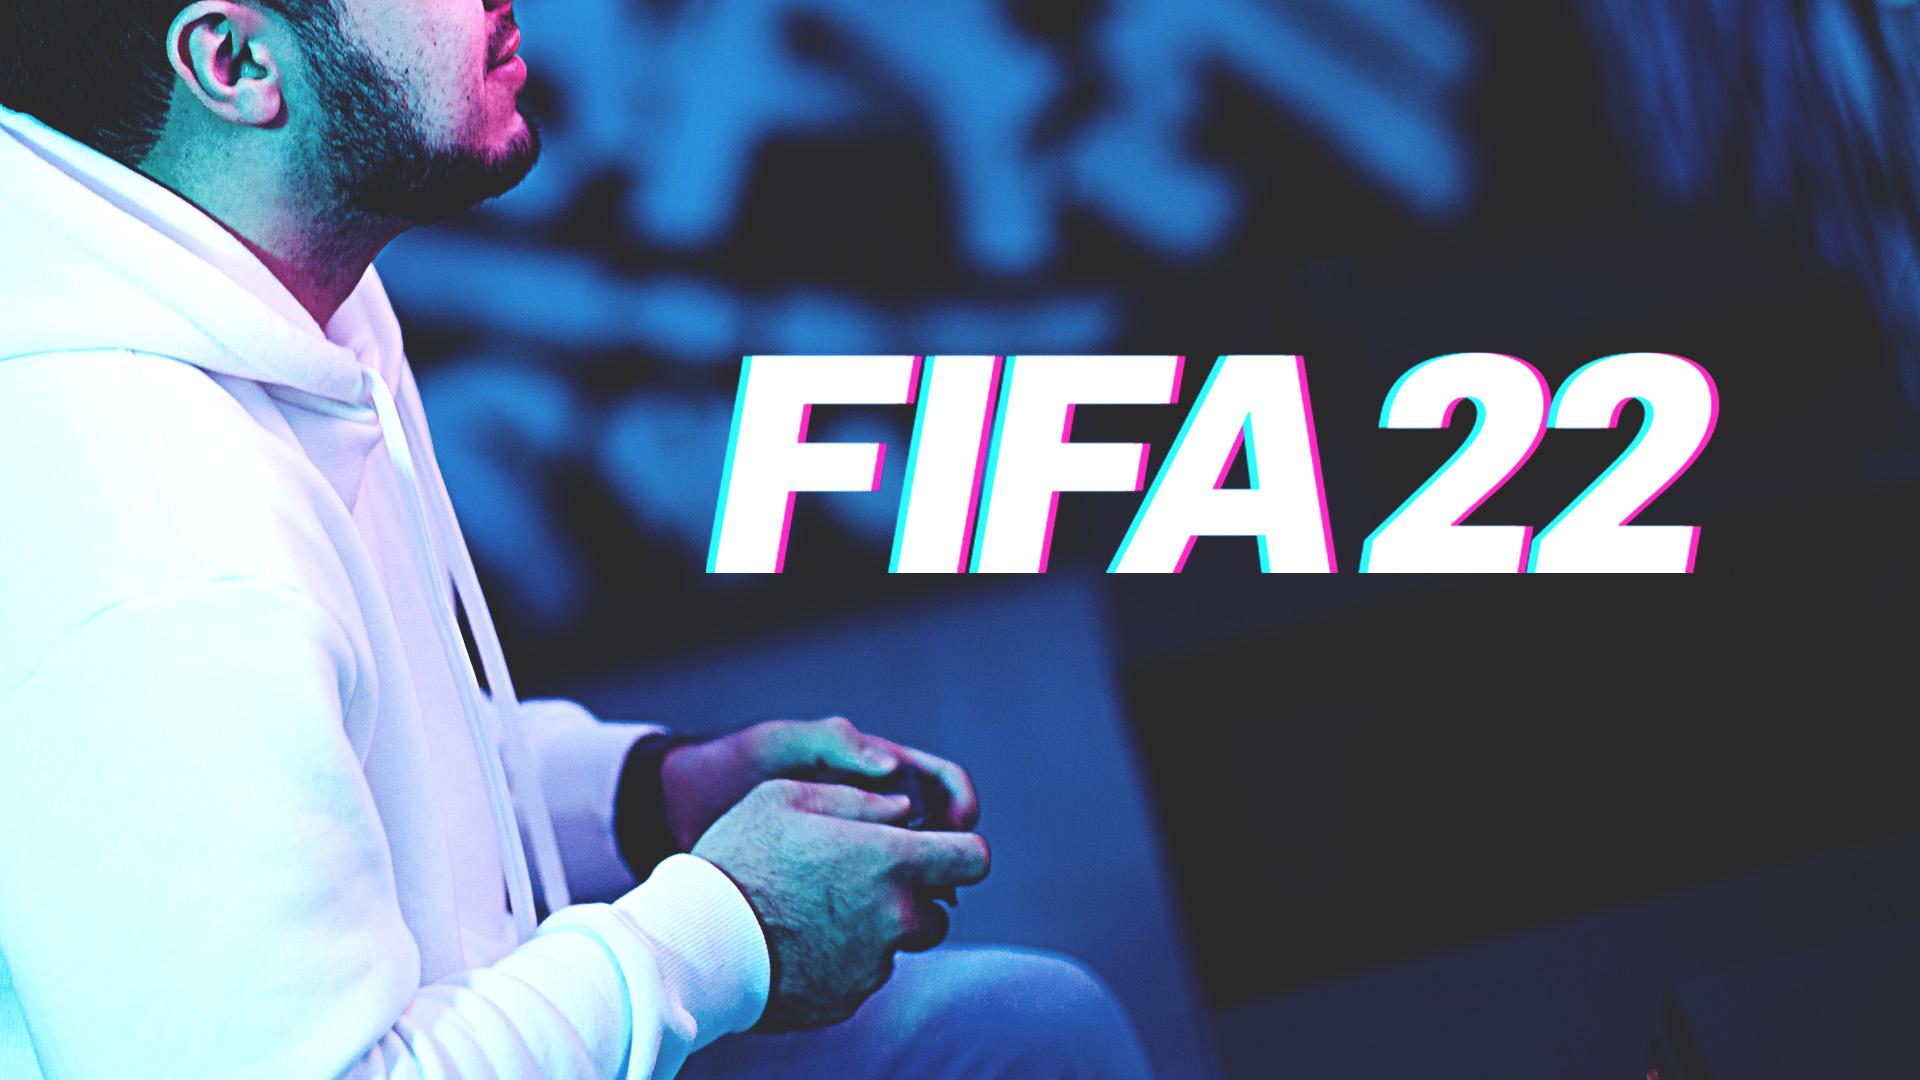 Tekkz names FIFA 23 players you need in your Ultimate Team